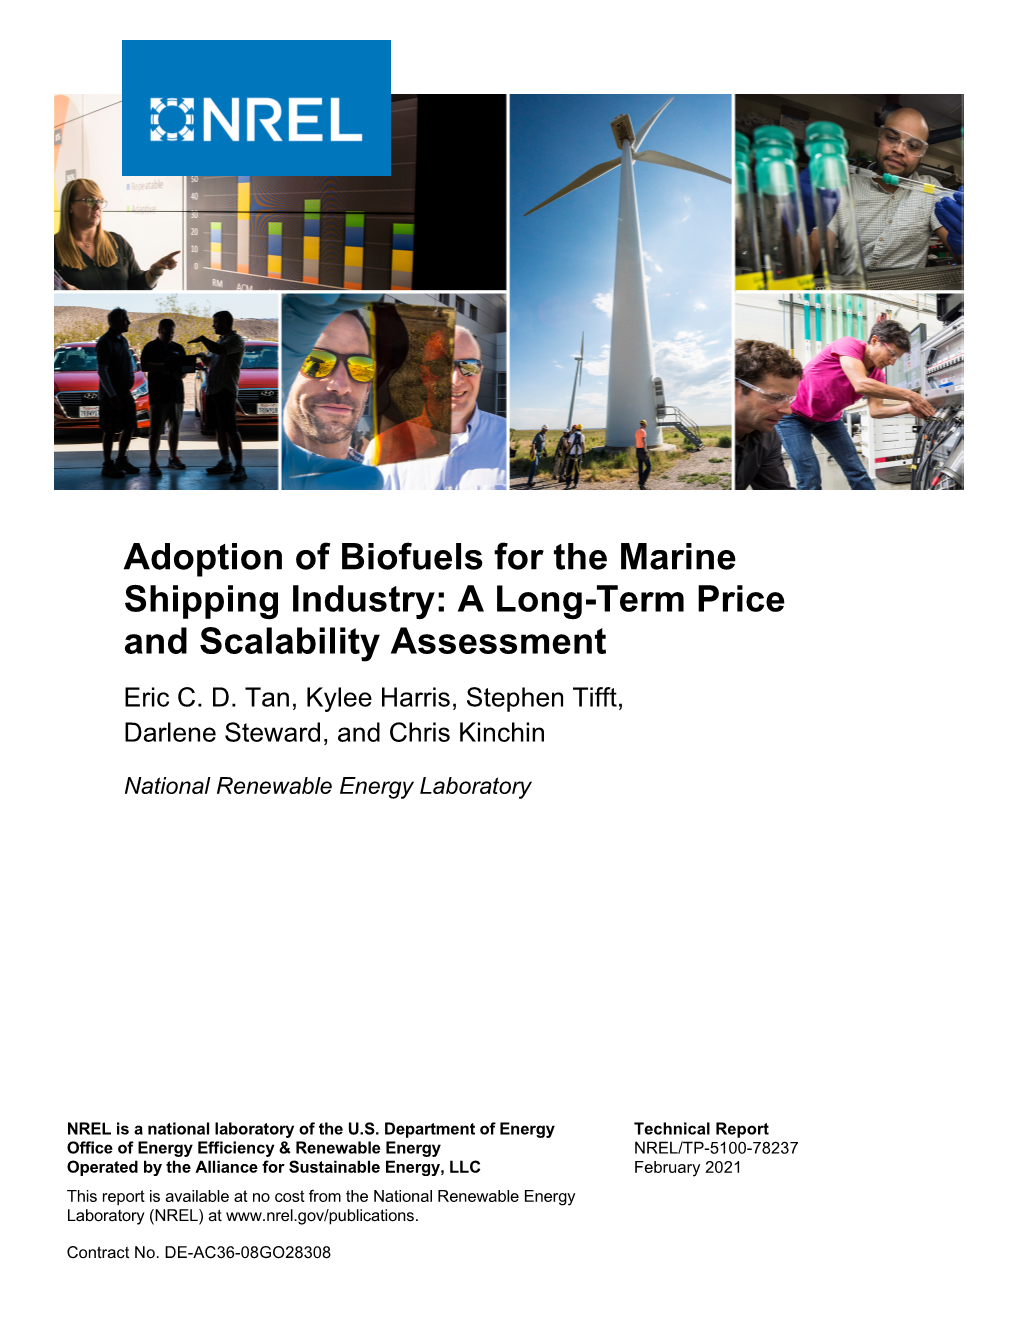 Adoption of Biofuels for the Marine Shipping Industry: a Long-Term Price and Scalability Assessment Eric C